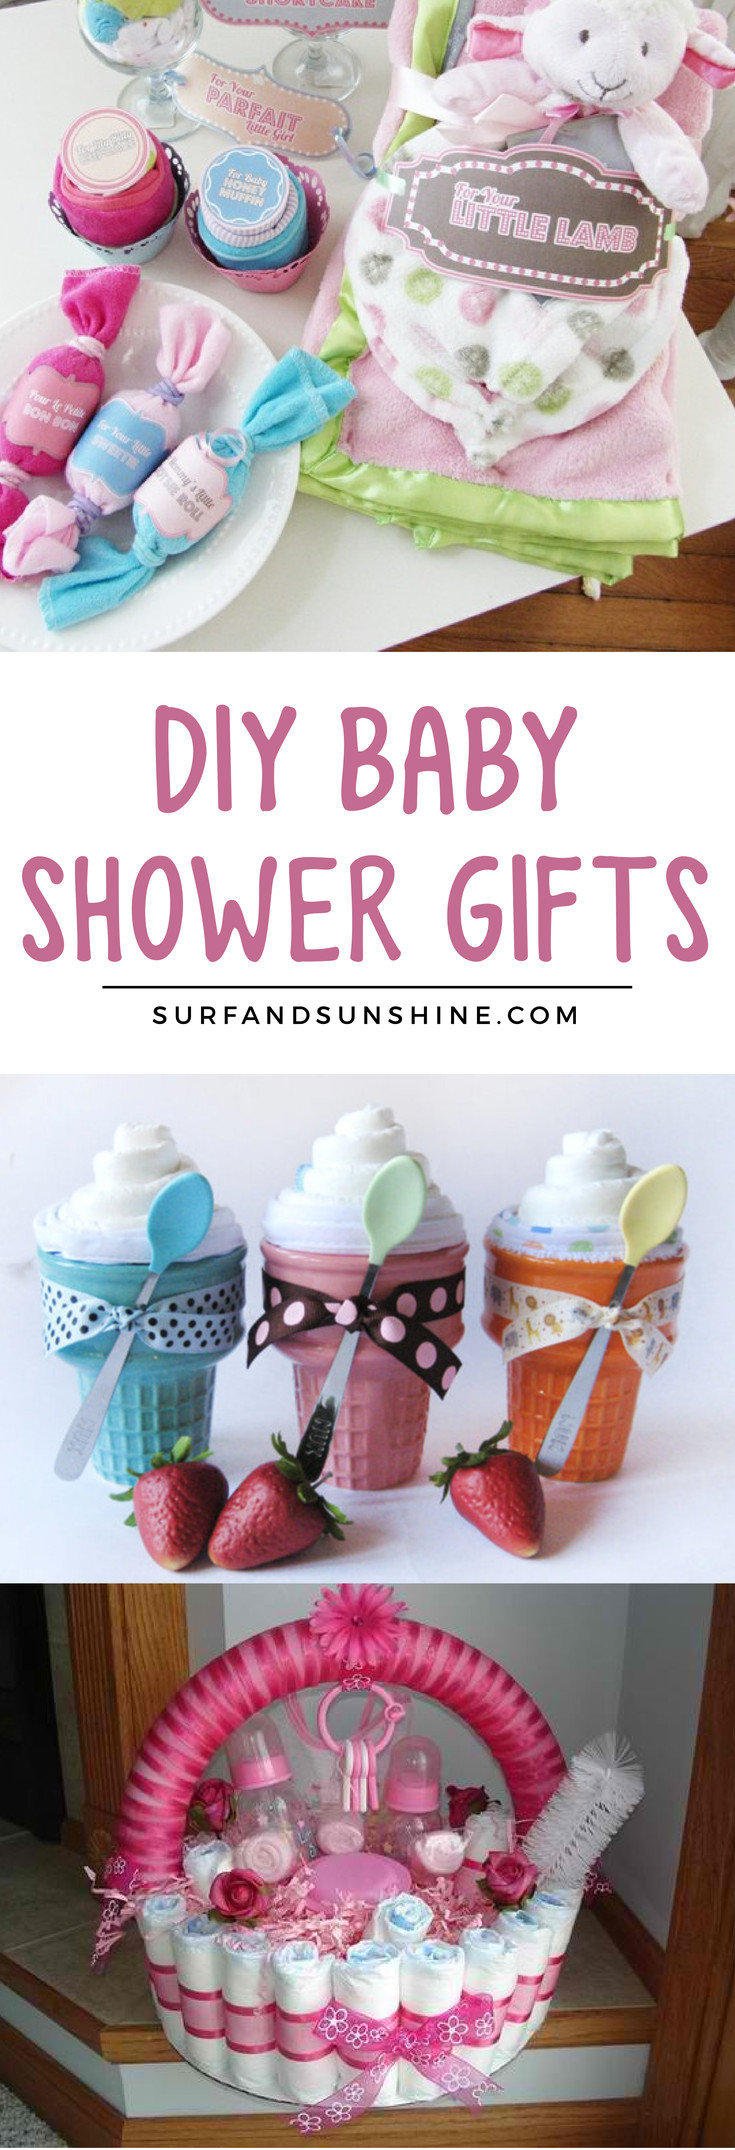 Personal Baby Shower Gift Ideas
 Unique DIY Baby Shower Gifts for Boys and Girls